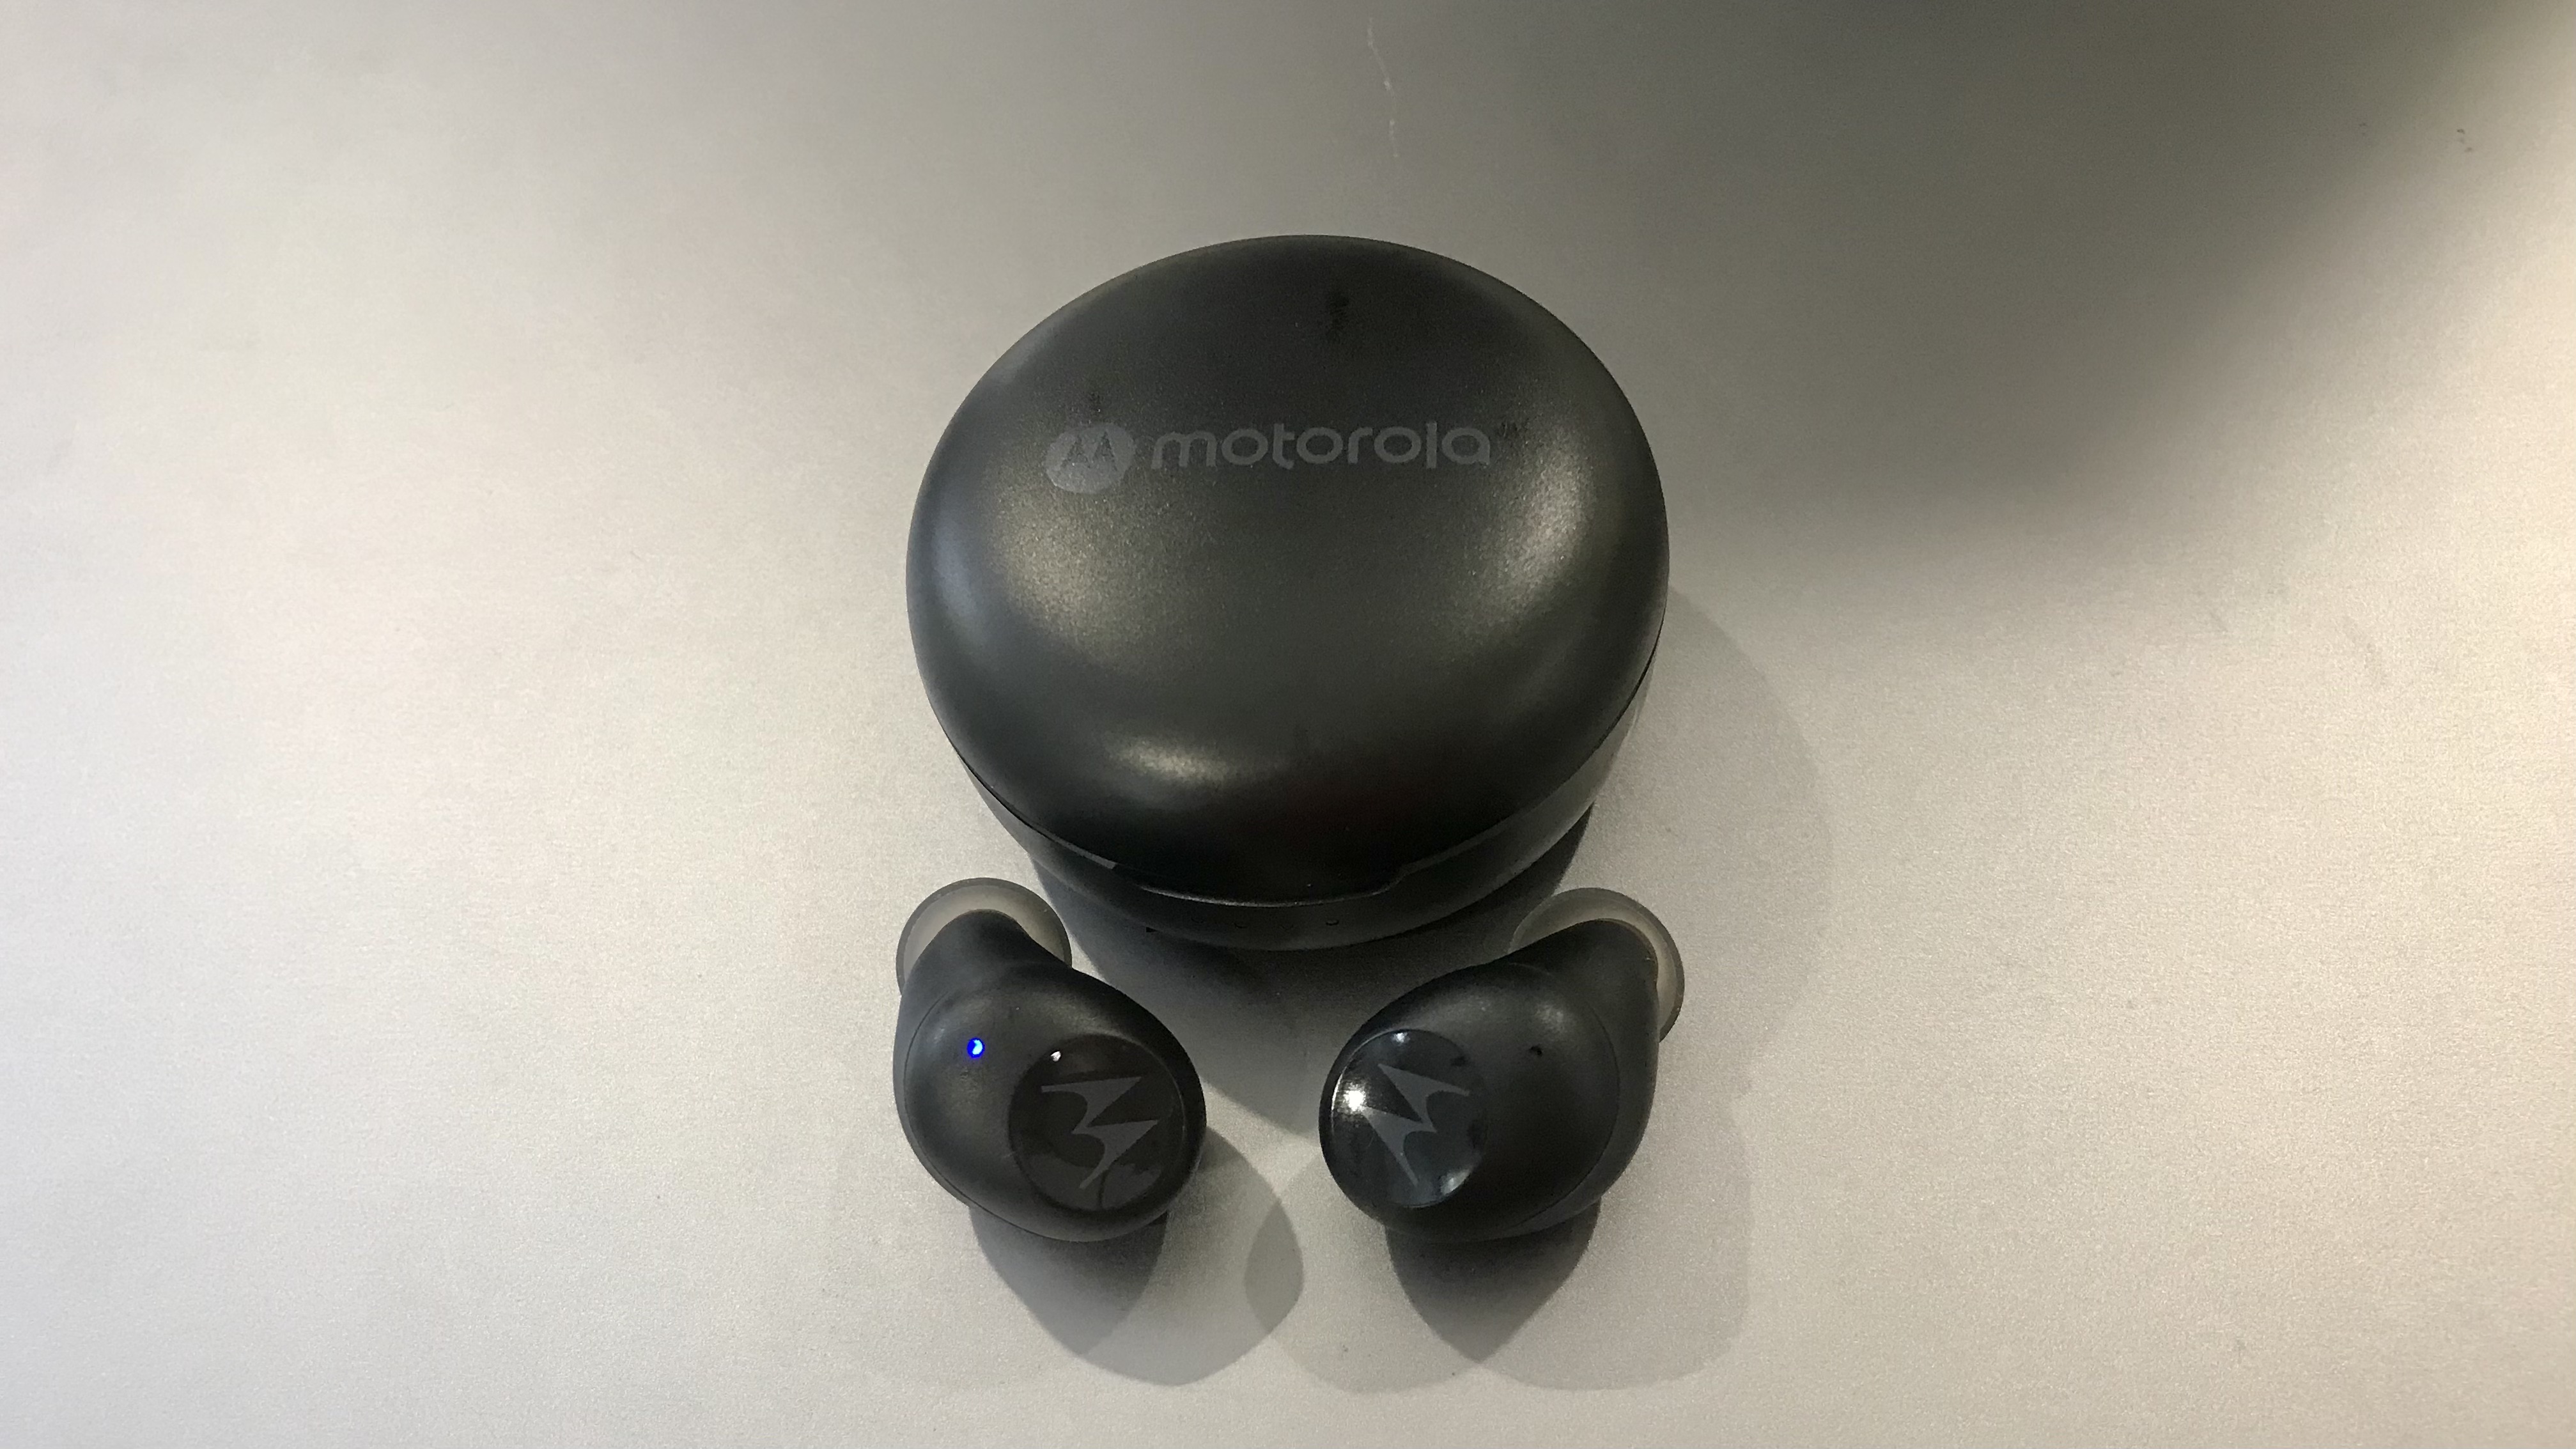 Moto Buds 150 and case, on silver background